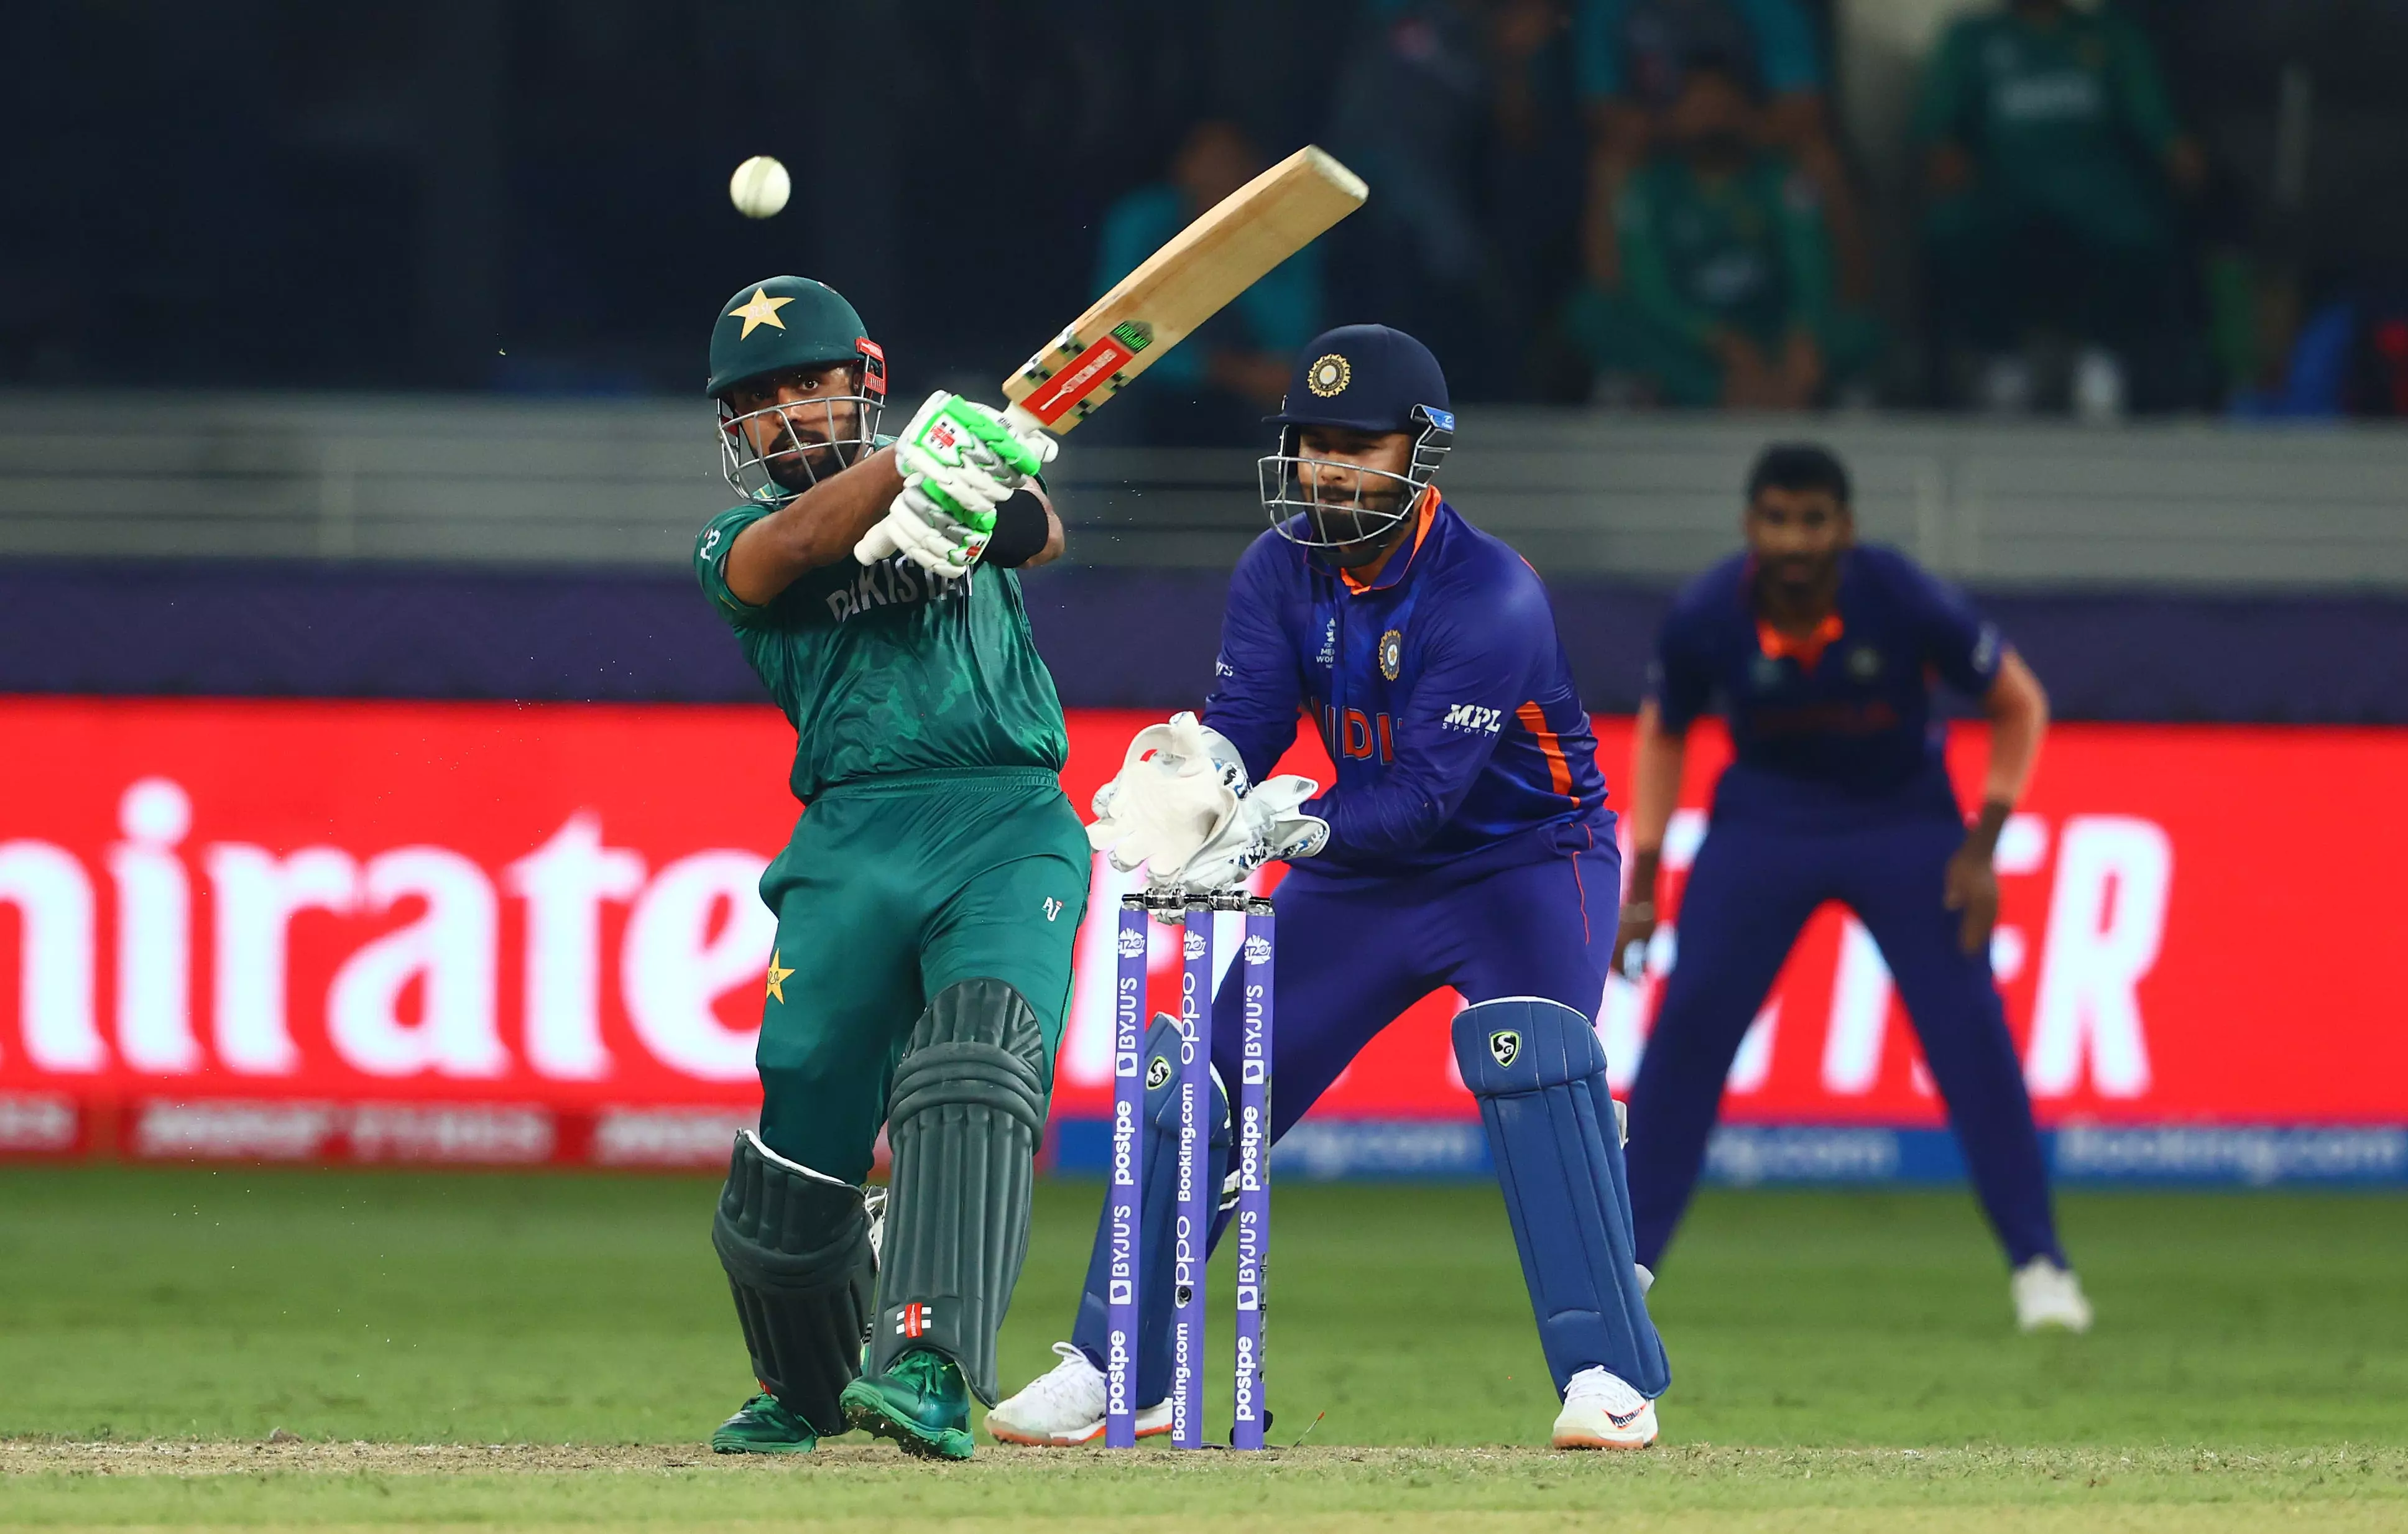 Babar Azam of Pakistan plays a shot as Rishabh Pant of India looks on during the ICC Men